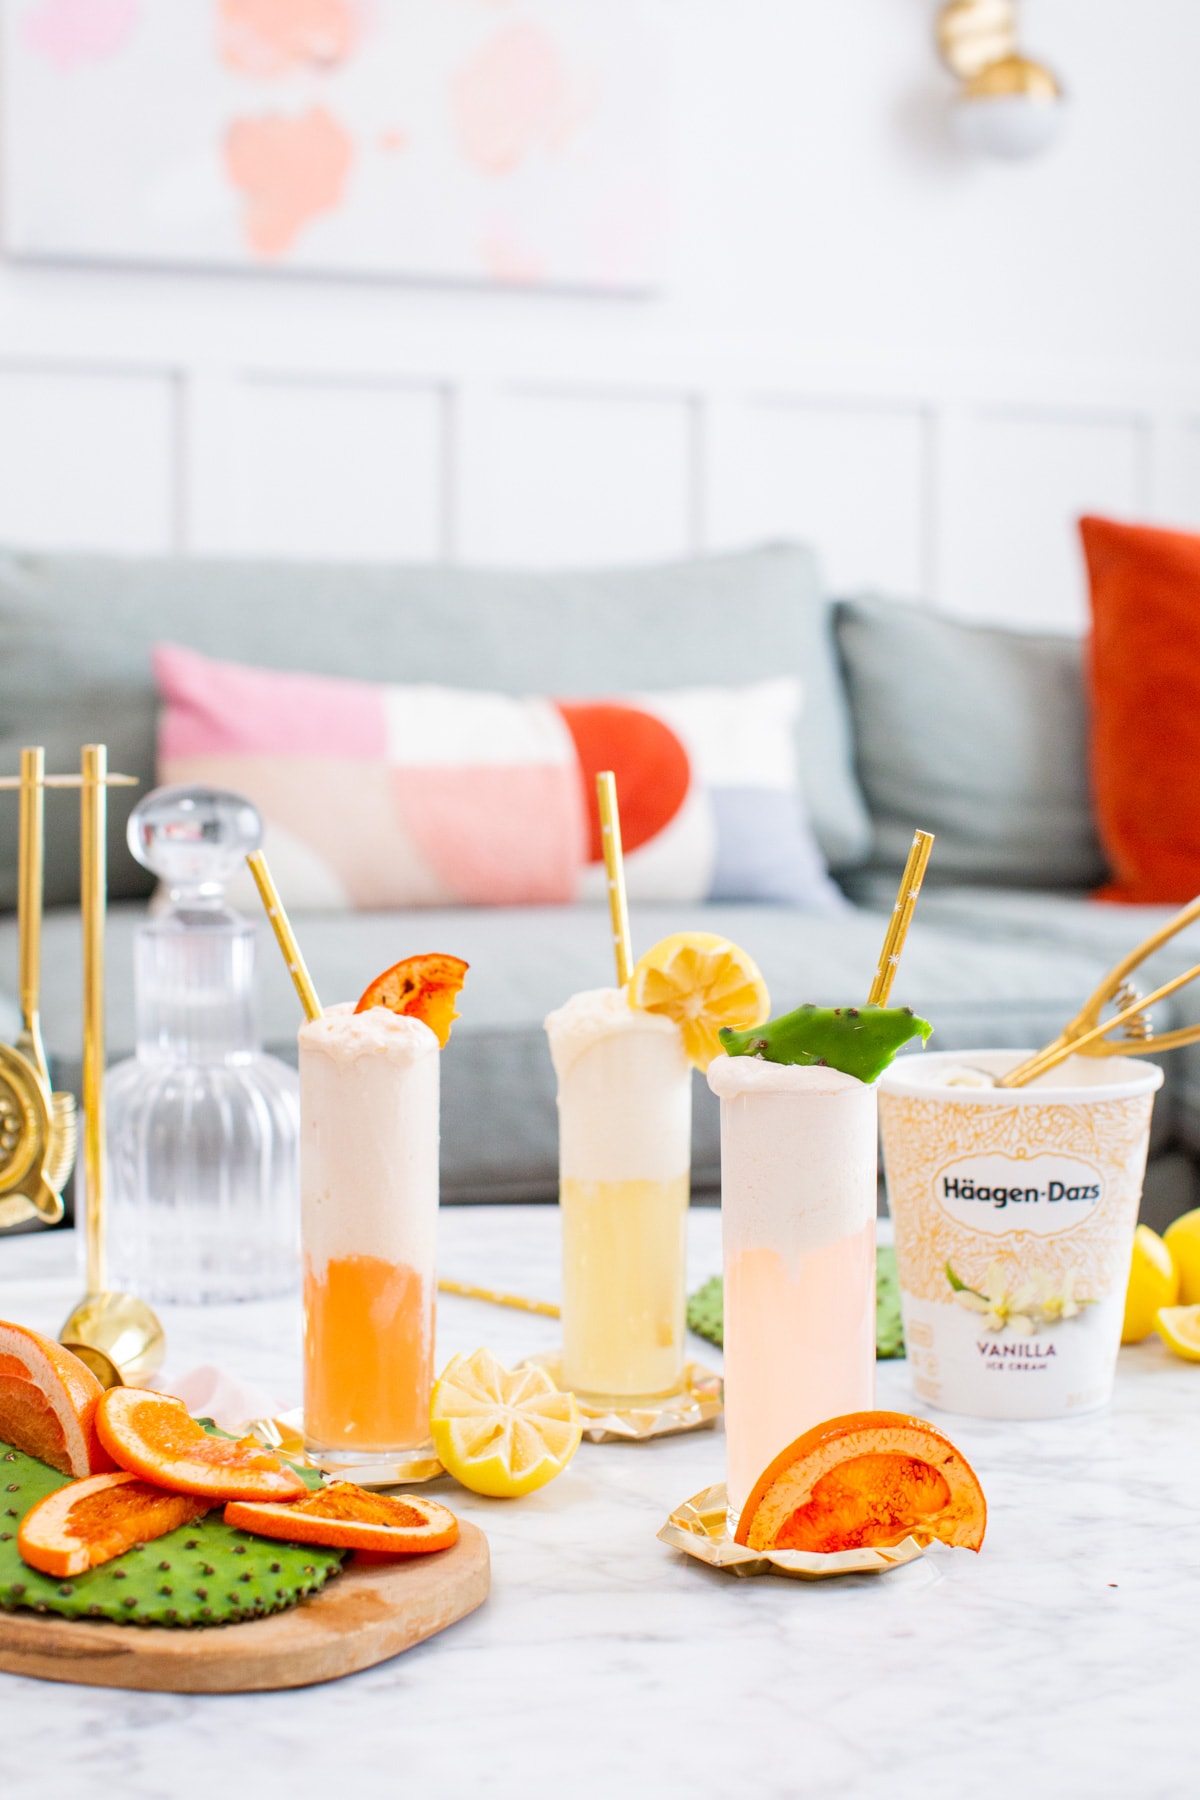 3 Sparkling Ice Cream Cocktail Recipes by top Houston lifestyle blogger Ashley Rose of Sugar & Cloth #cocktails #entertaining #recipes #icecream